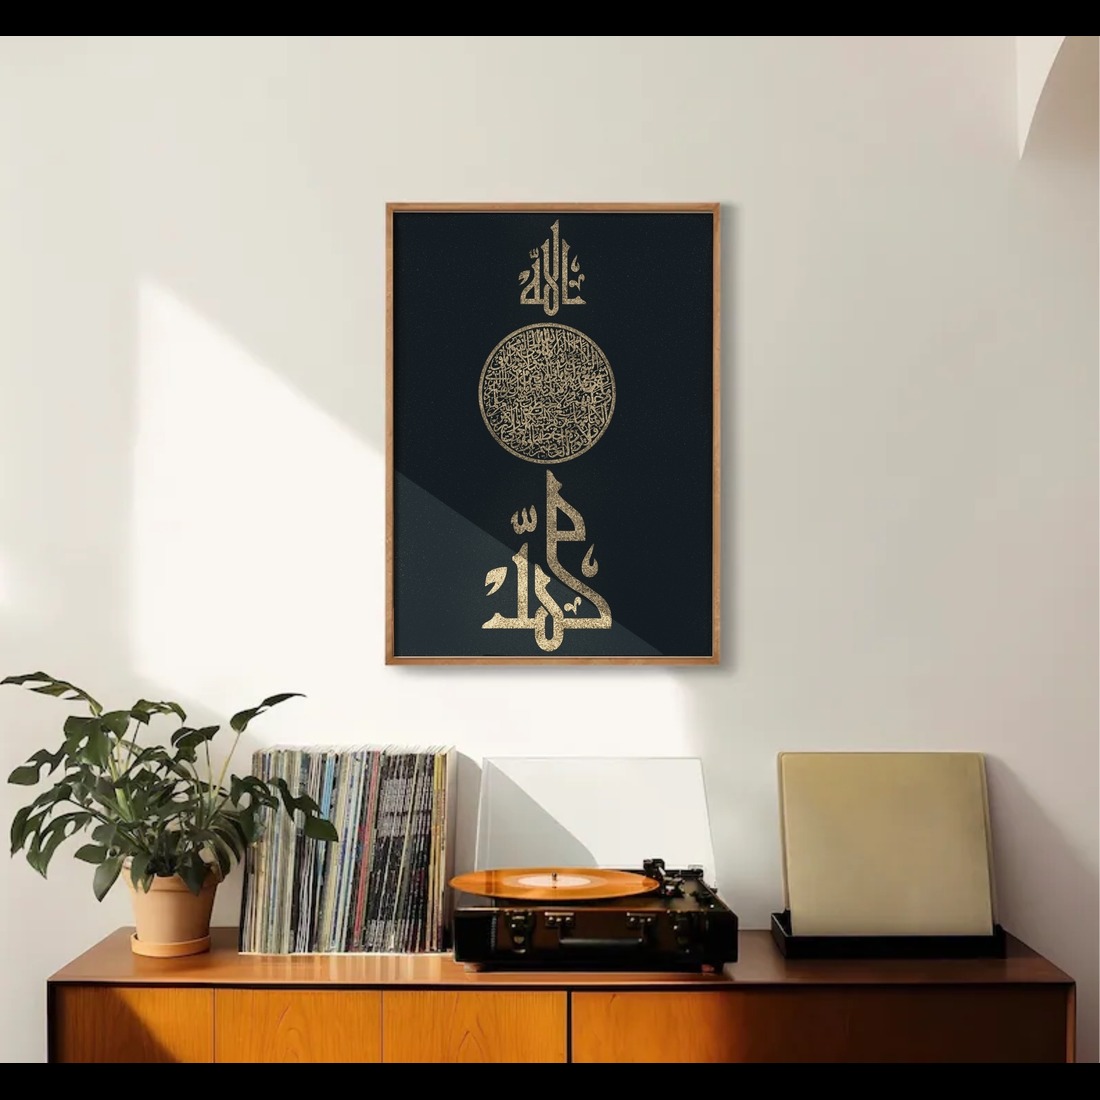 Beautiful arabic calligraphic wall art preview image.